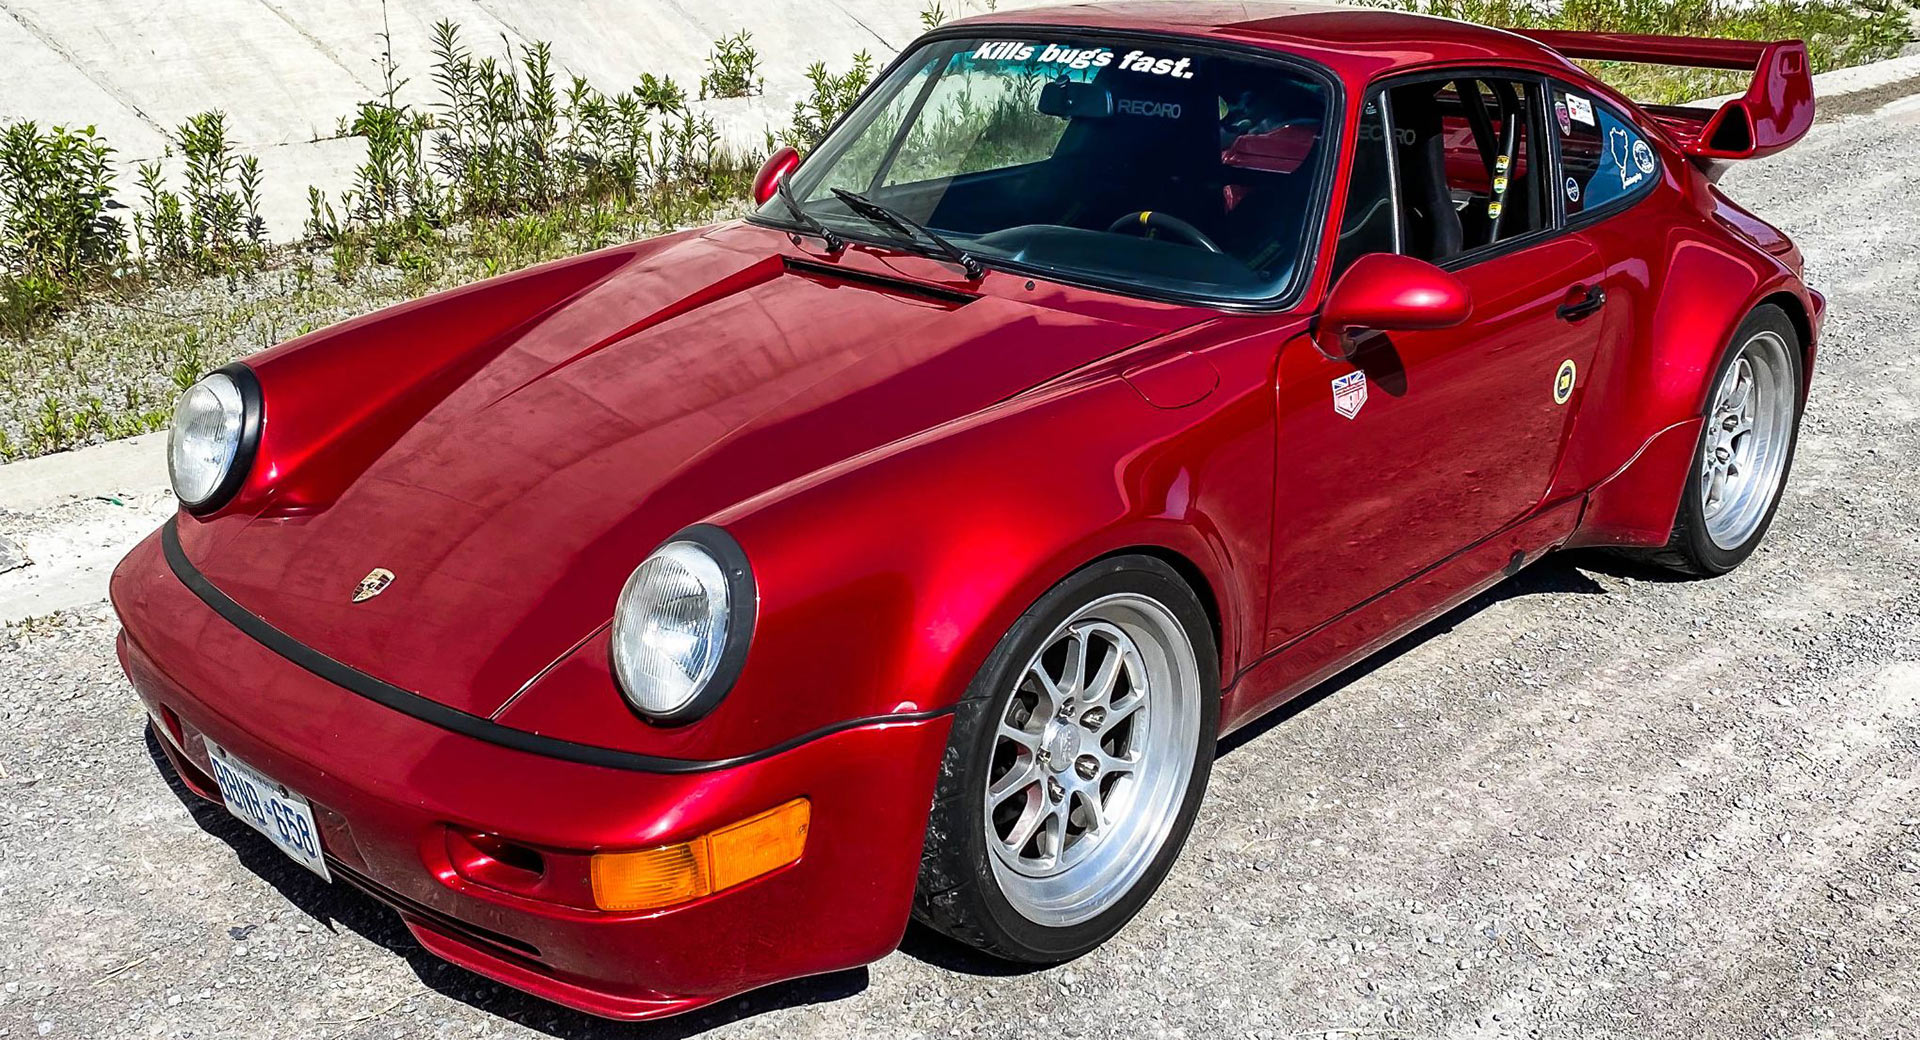 1975 Porsche 911 'Outlaw' Looks Like An Awesome Track Toy | Carscoops